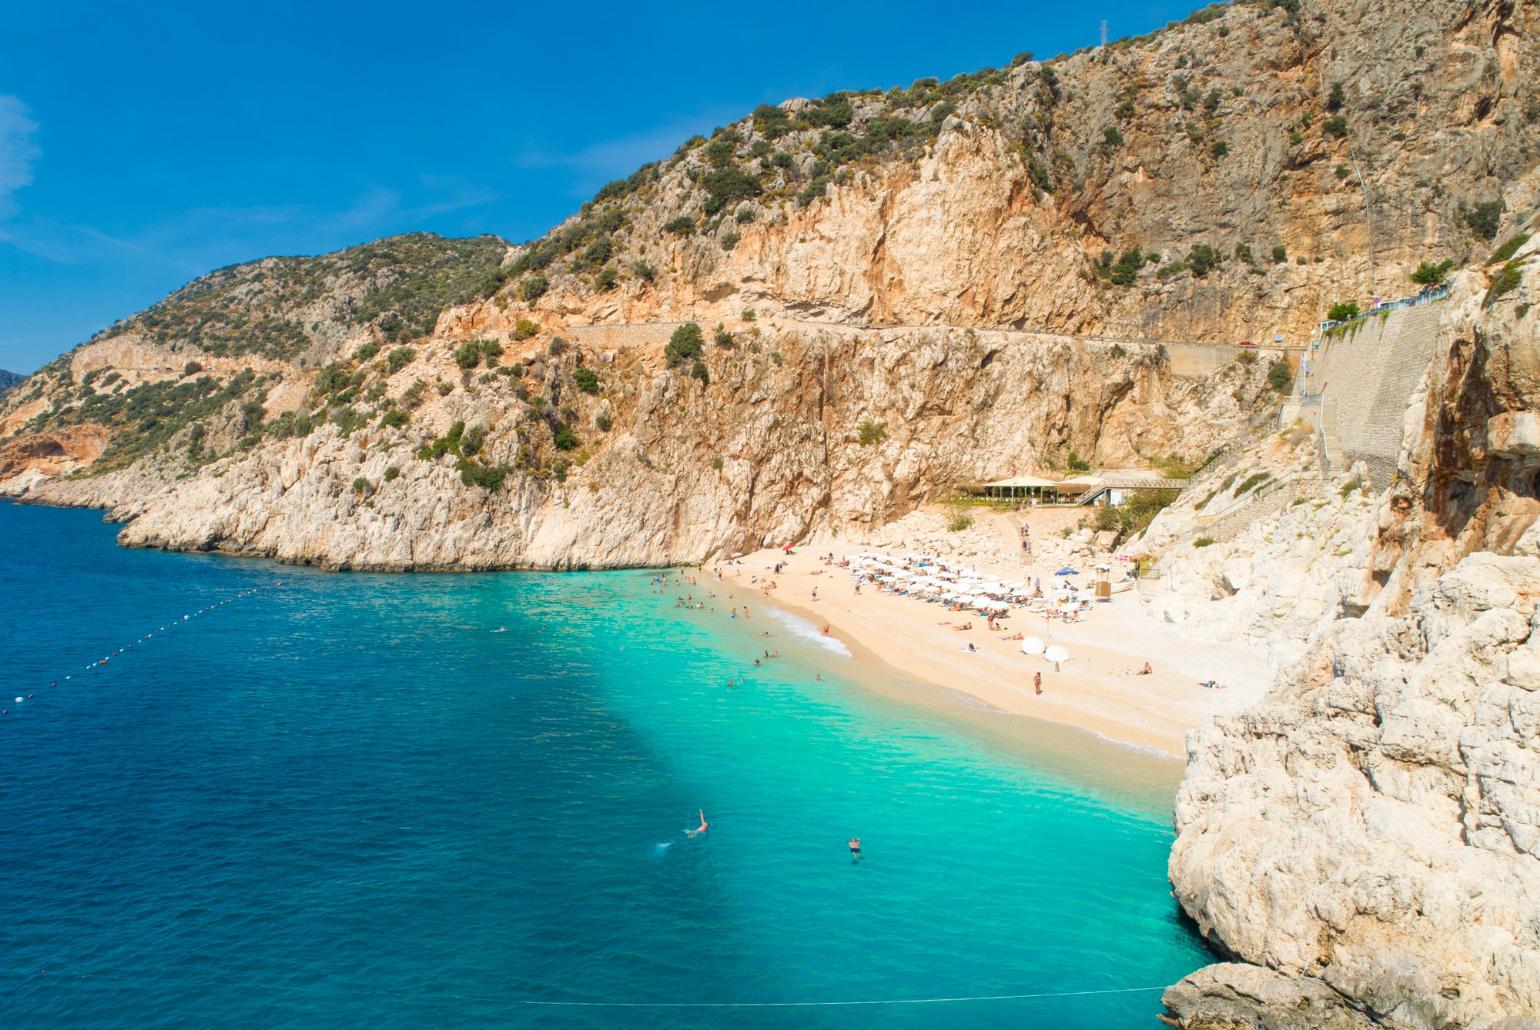 Kaputas Beach - on the finest beaches in Turkey, and only a short drive from Villa Arykanoos